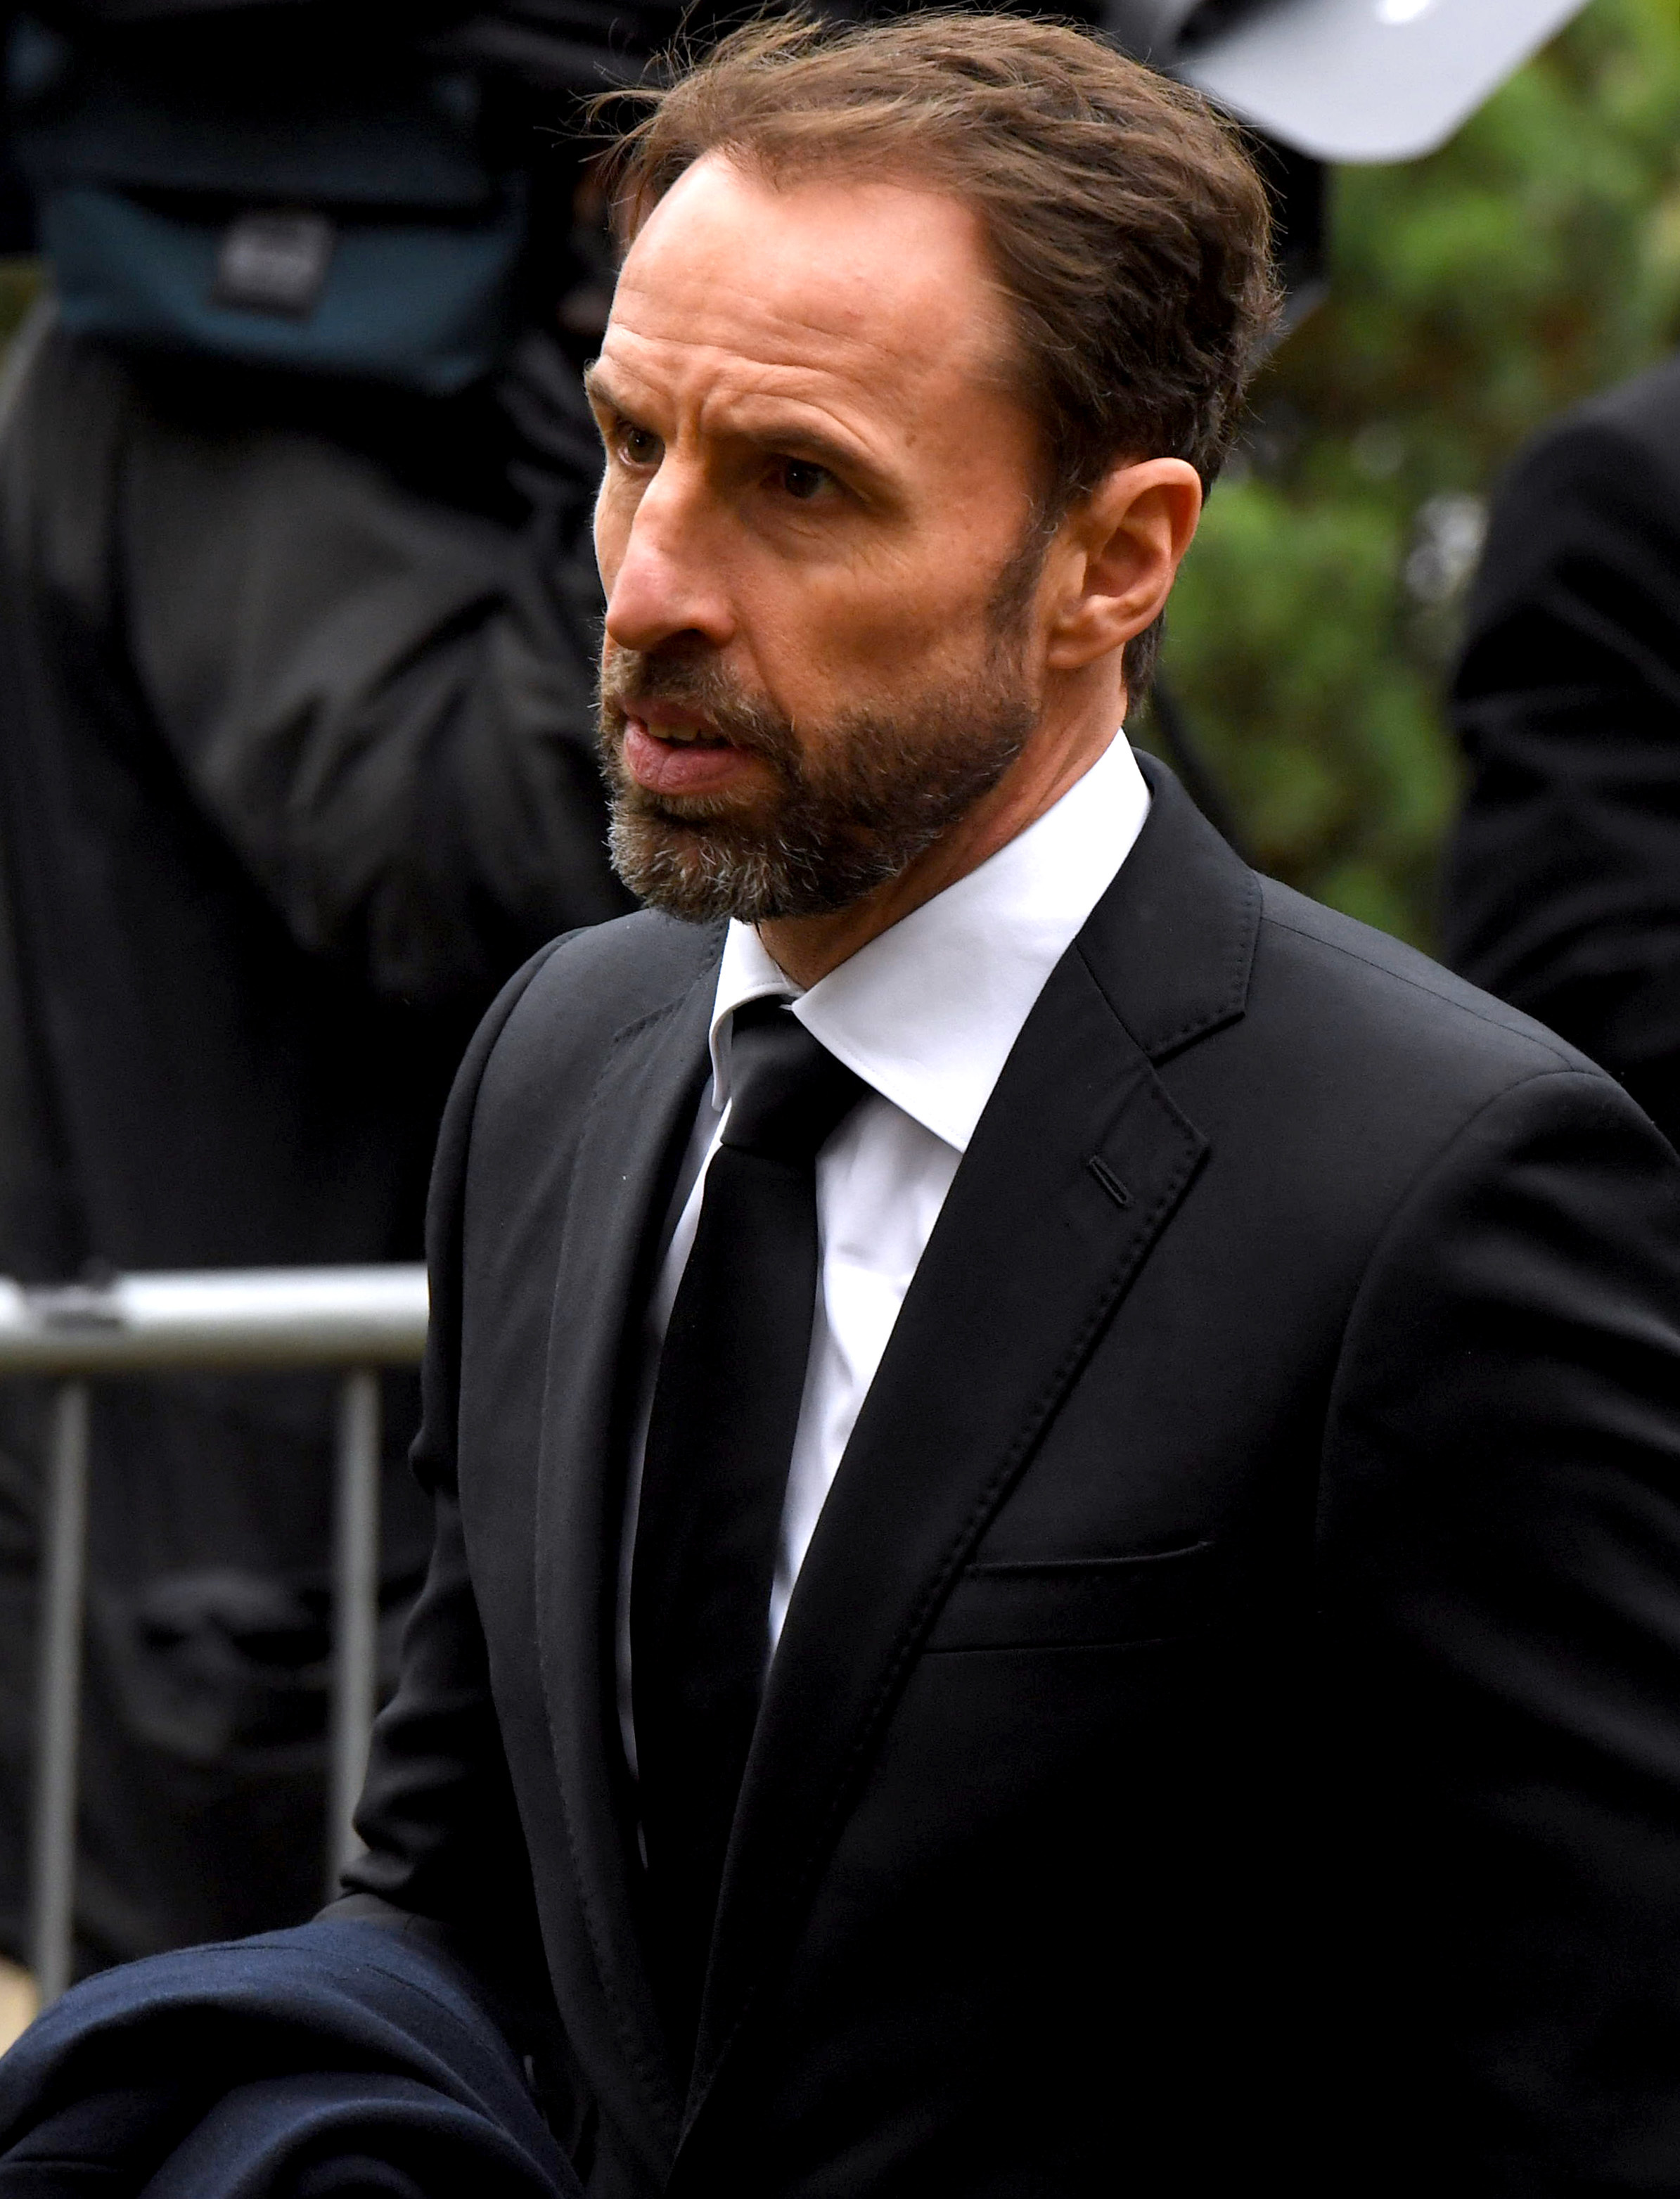 Gareth Southgate attended Sir Bobby Charlton's funeral on Monday